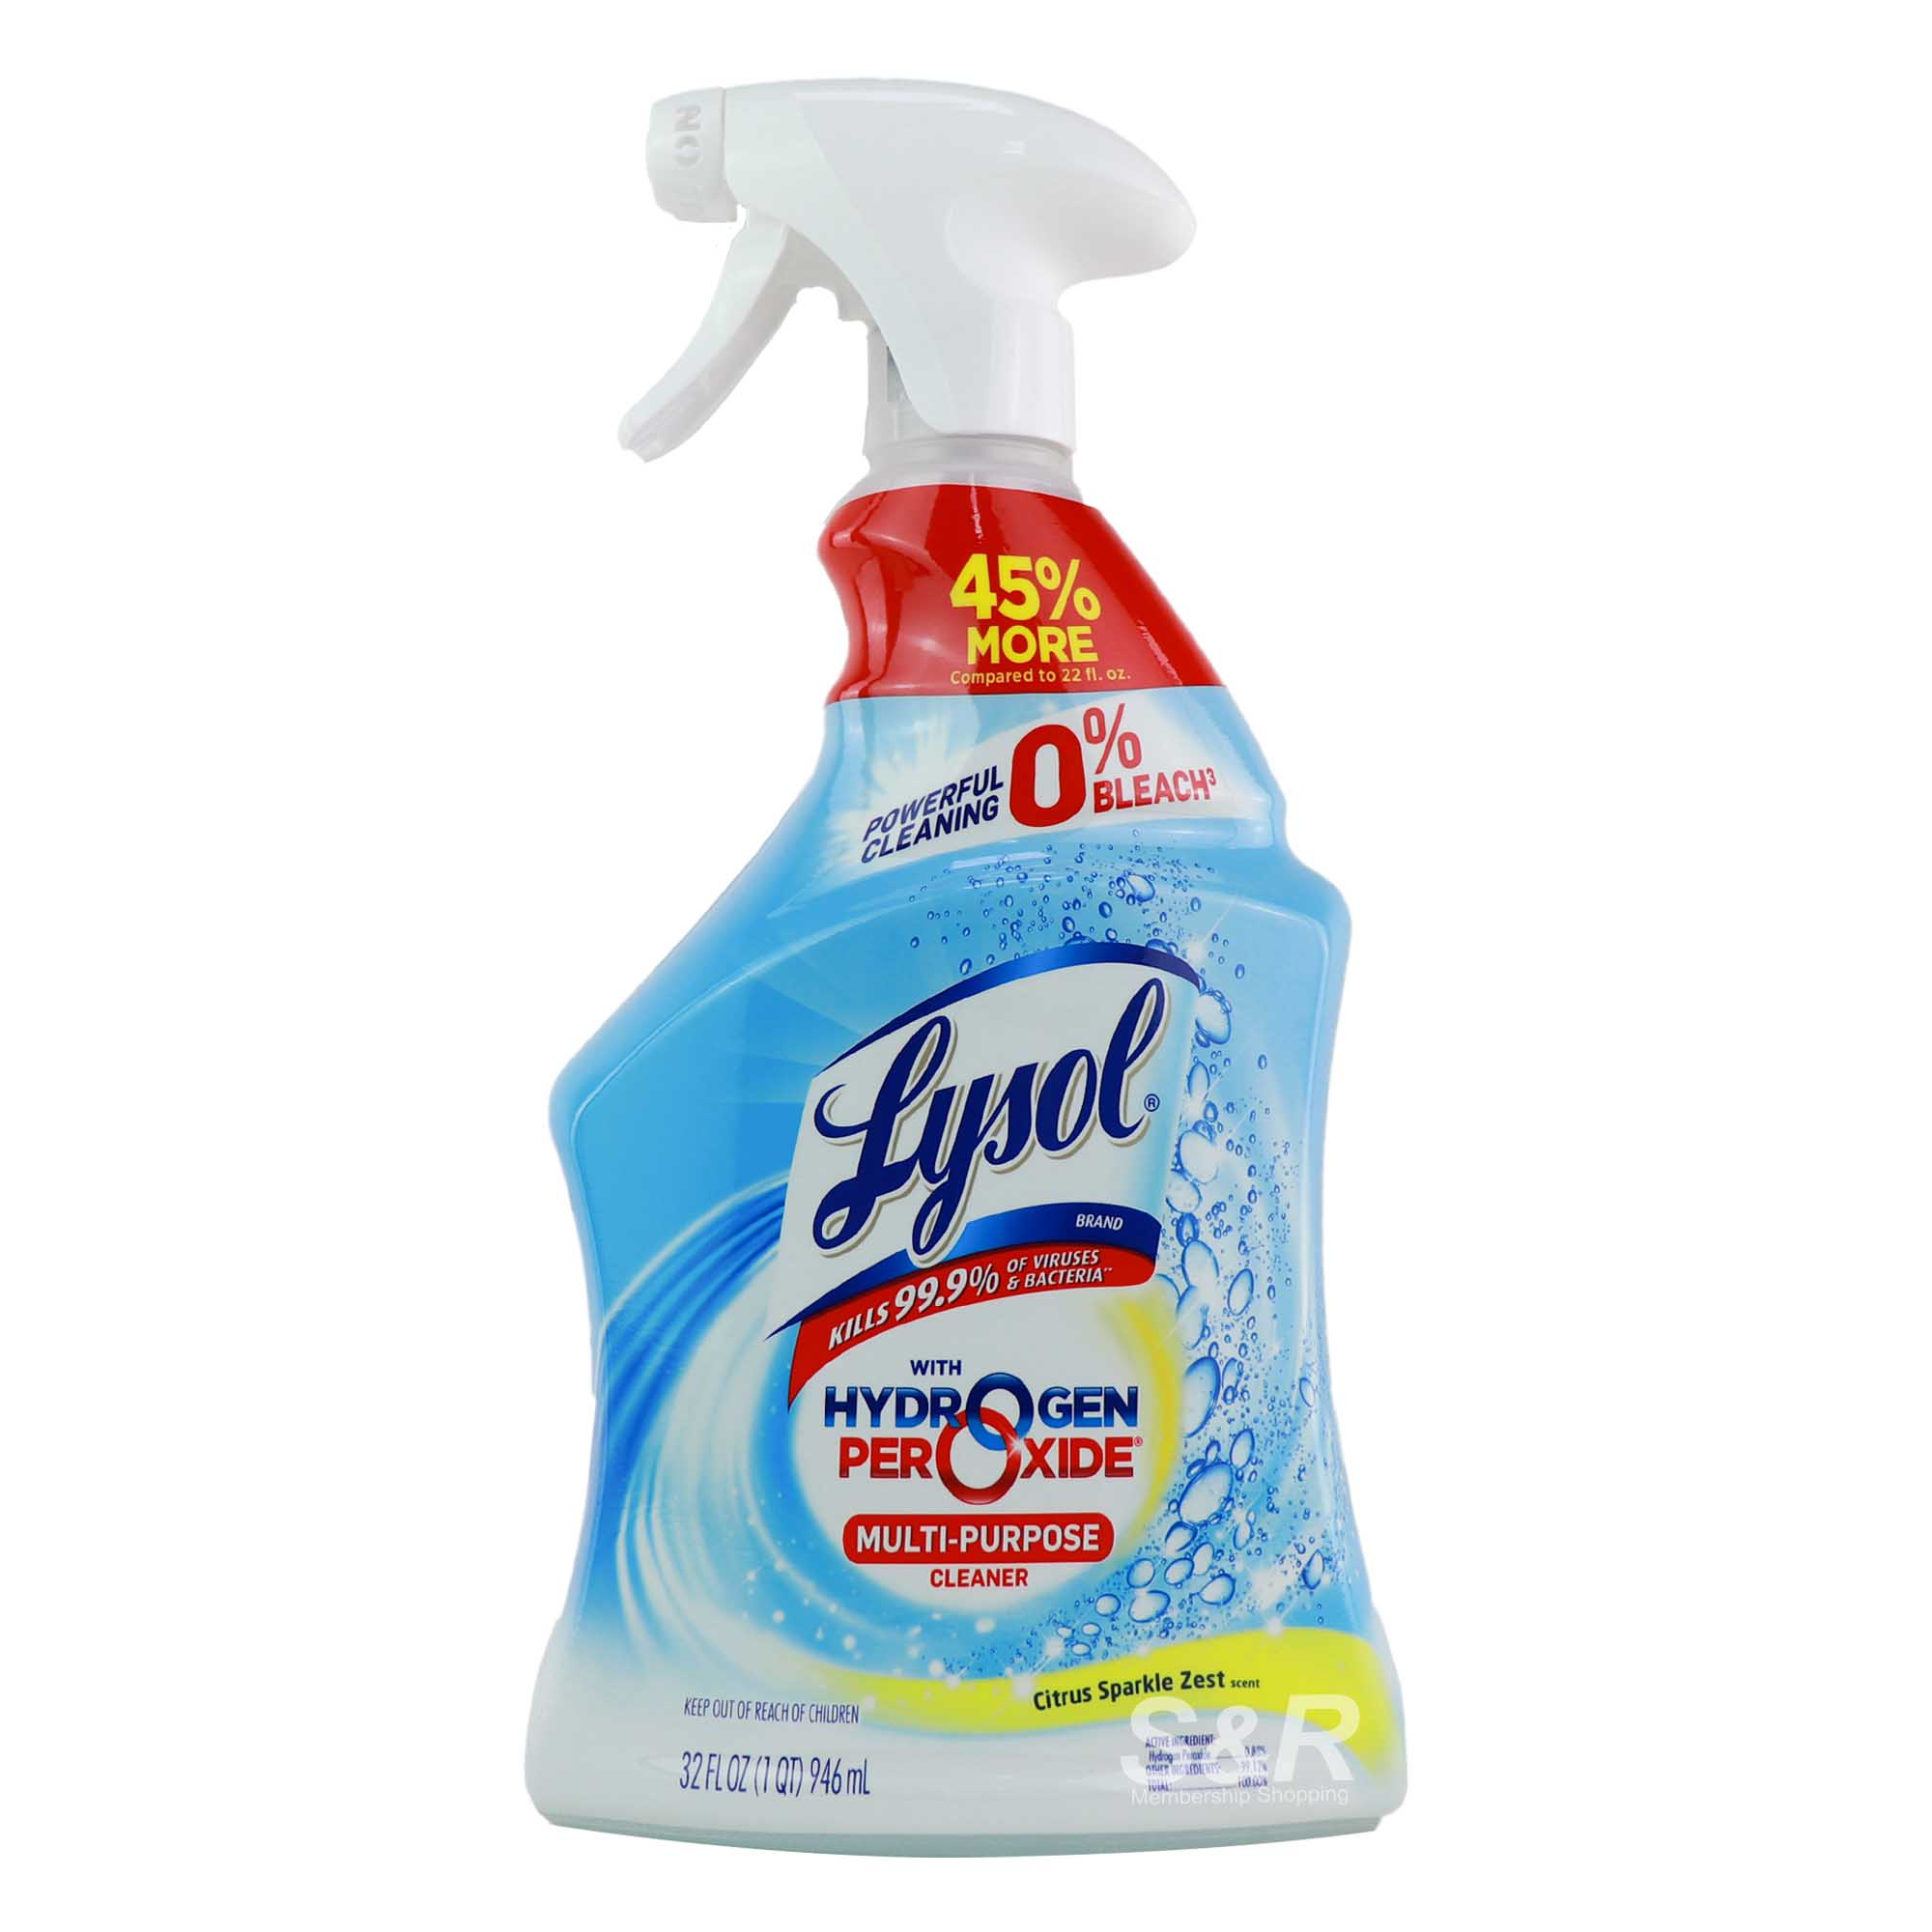 Lysol With Hydrogen Peroxide Citrus Sparkle Zest MultiPurpose Cleaner 946mL MD2x1aGETV 